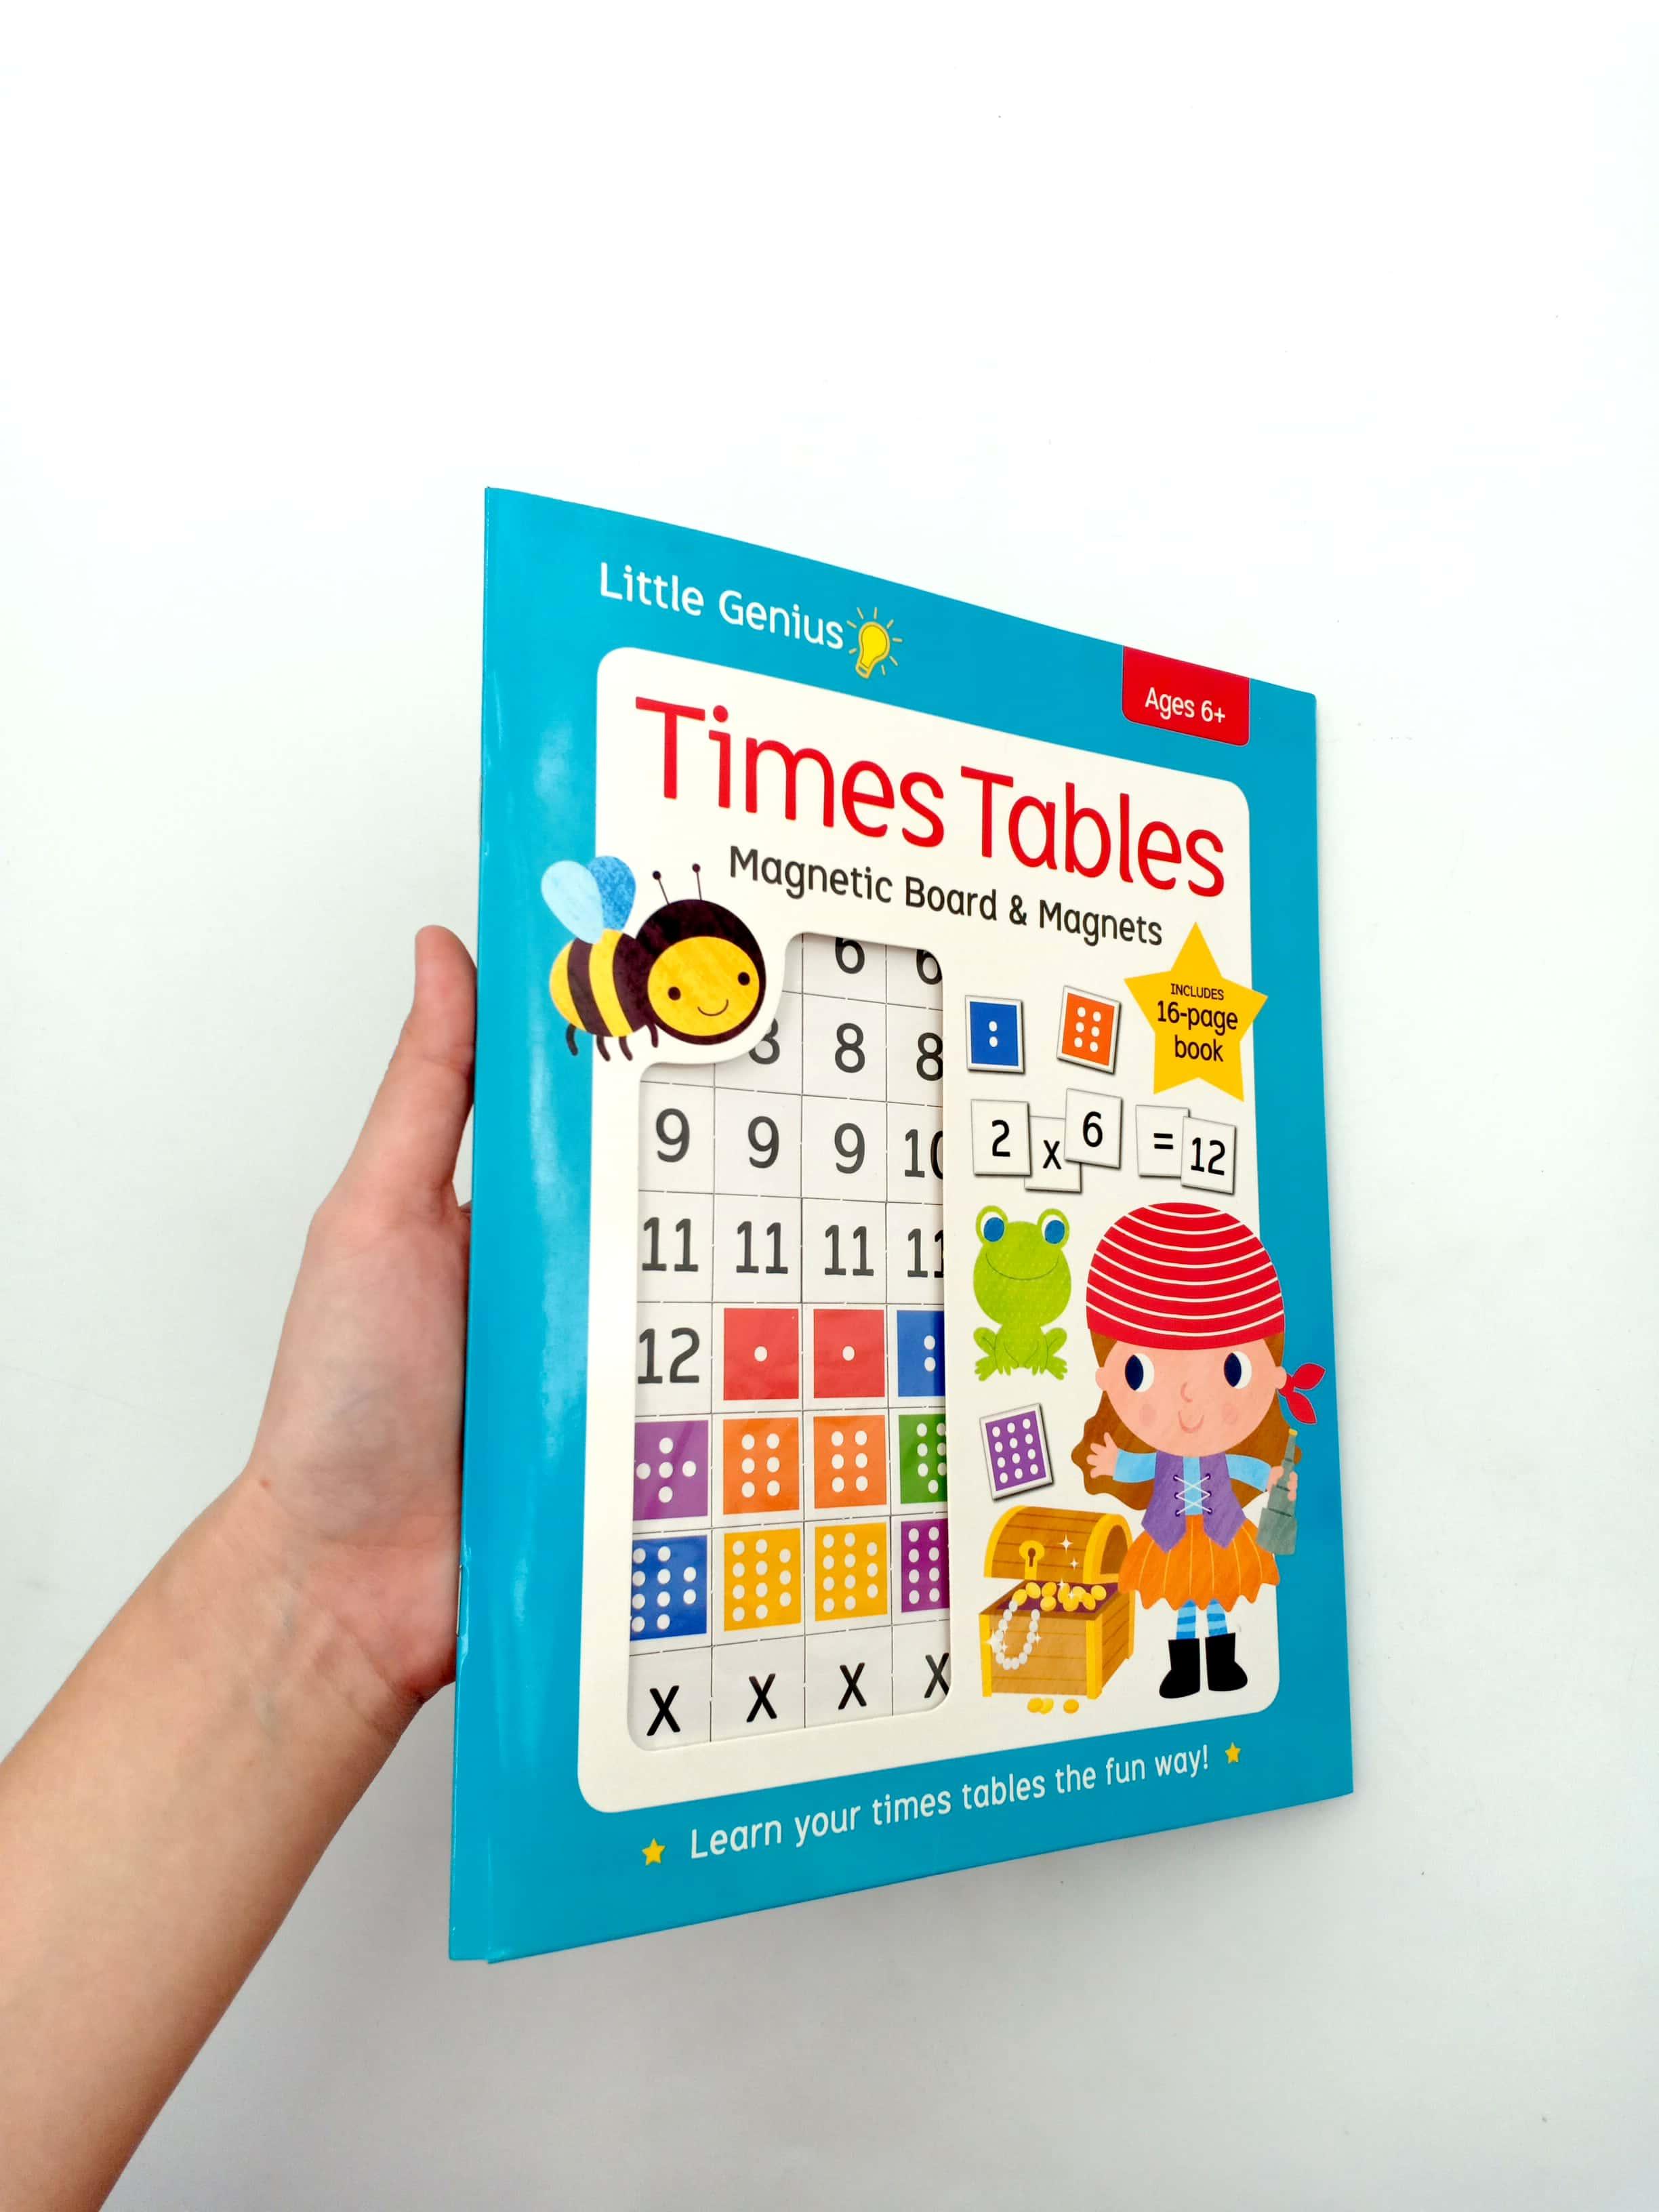 Little Genius Times Table - Magnetic Board & Magnets